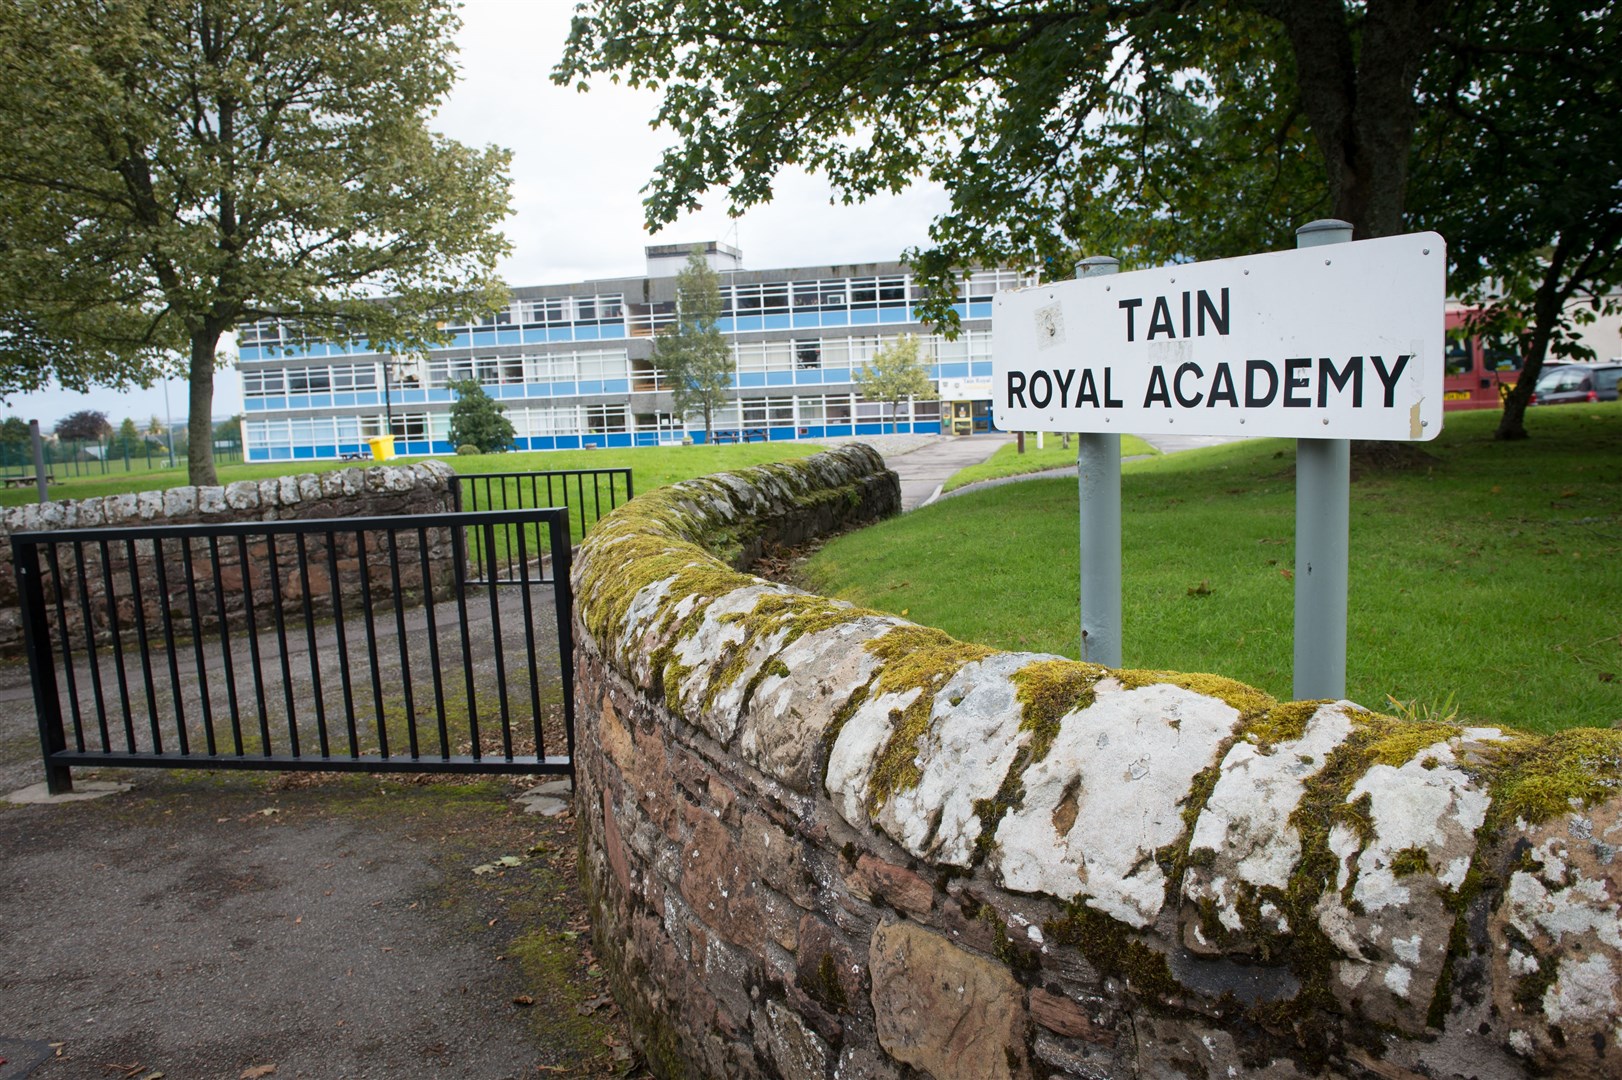 Tain Royal Academy has been hit with a coronavirus infection. Parents have been offered reassurances by public health chiefs.